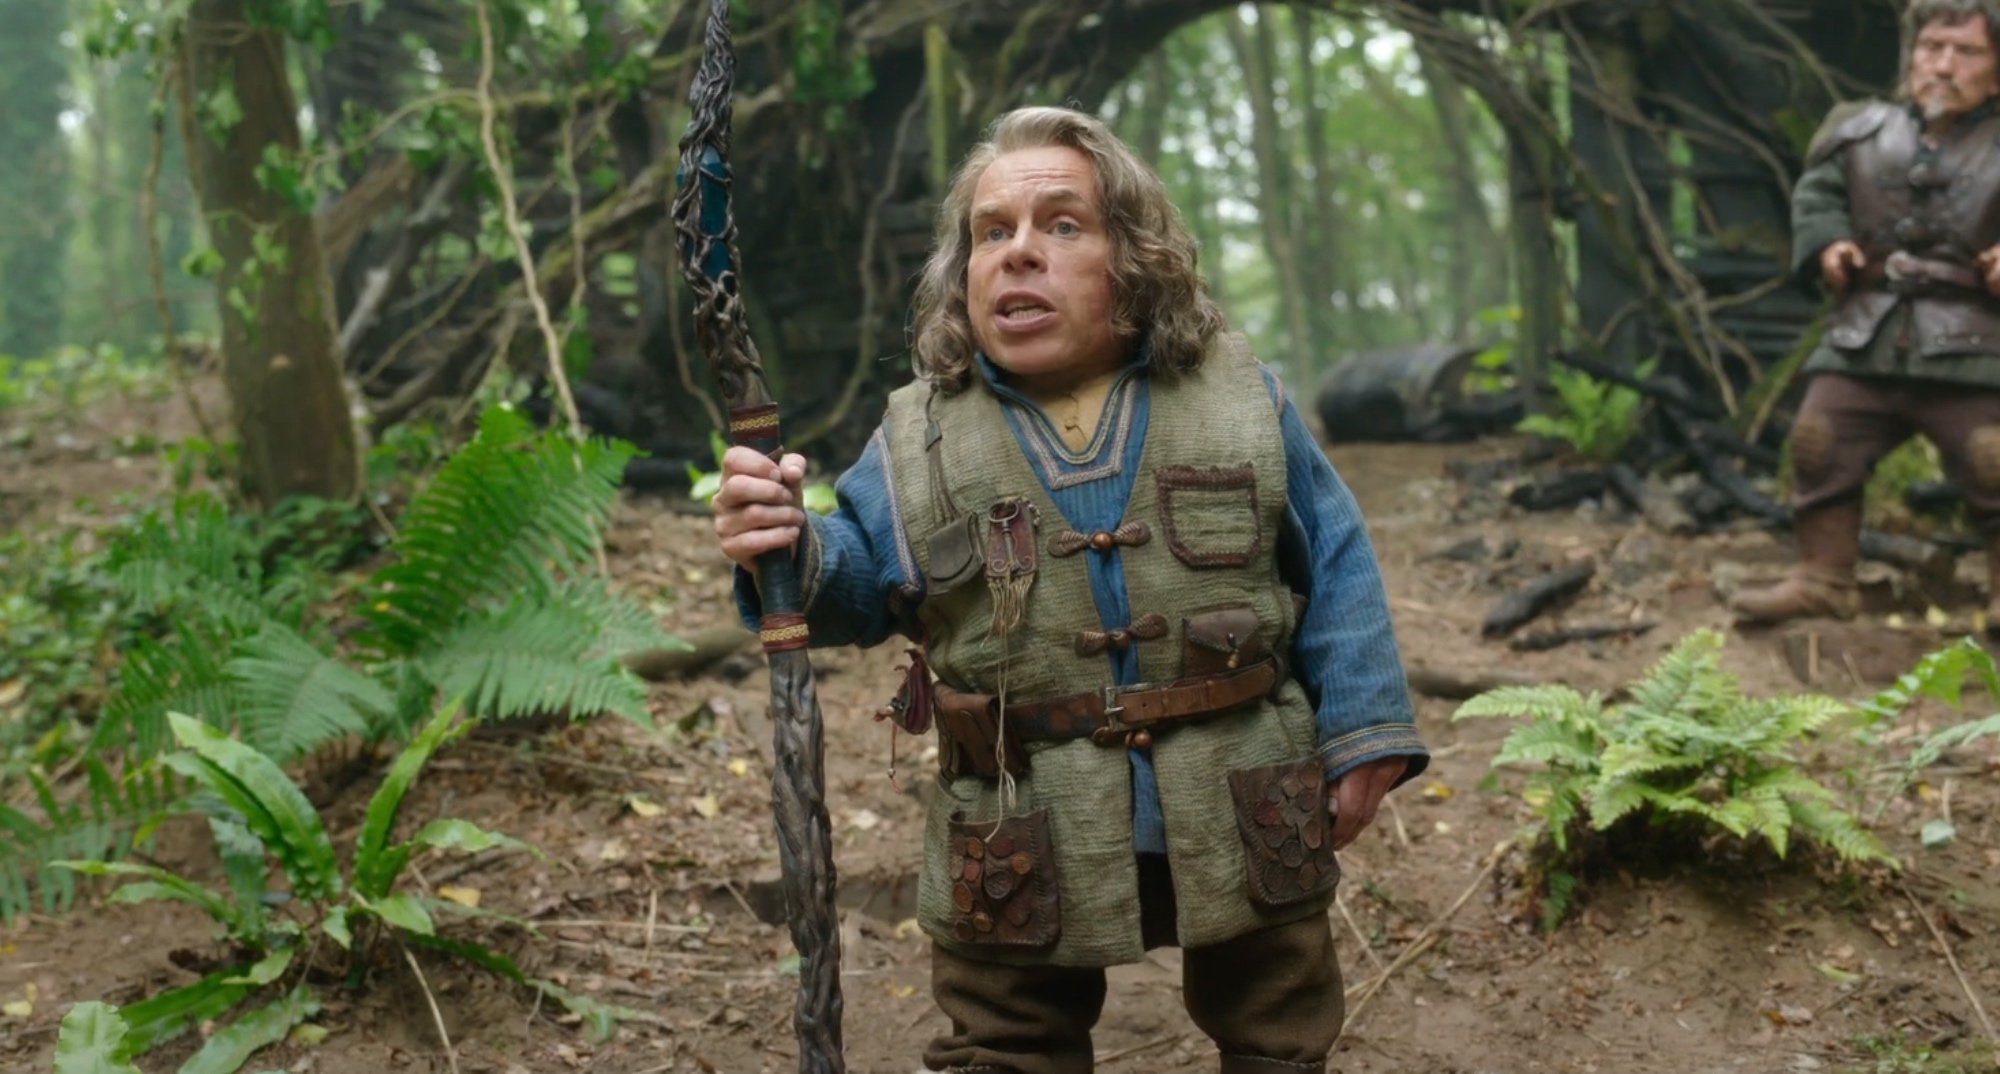 Warwick Davis as Willow Ufgood in the Disney+ series 'Willow' holding a staff in the forest.